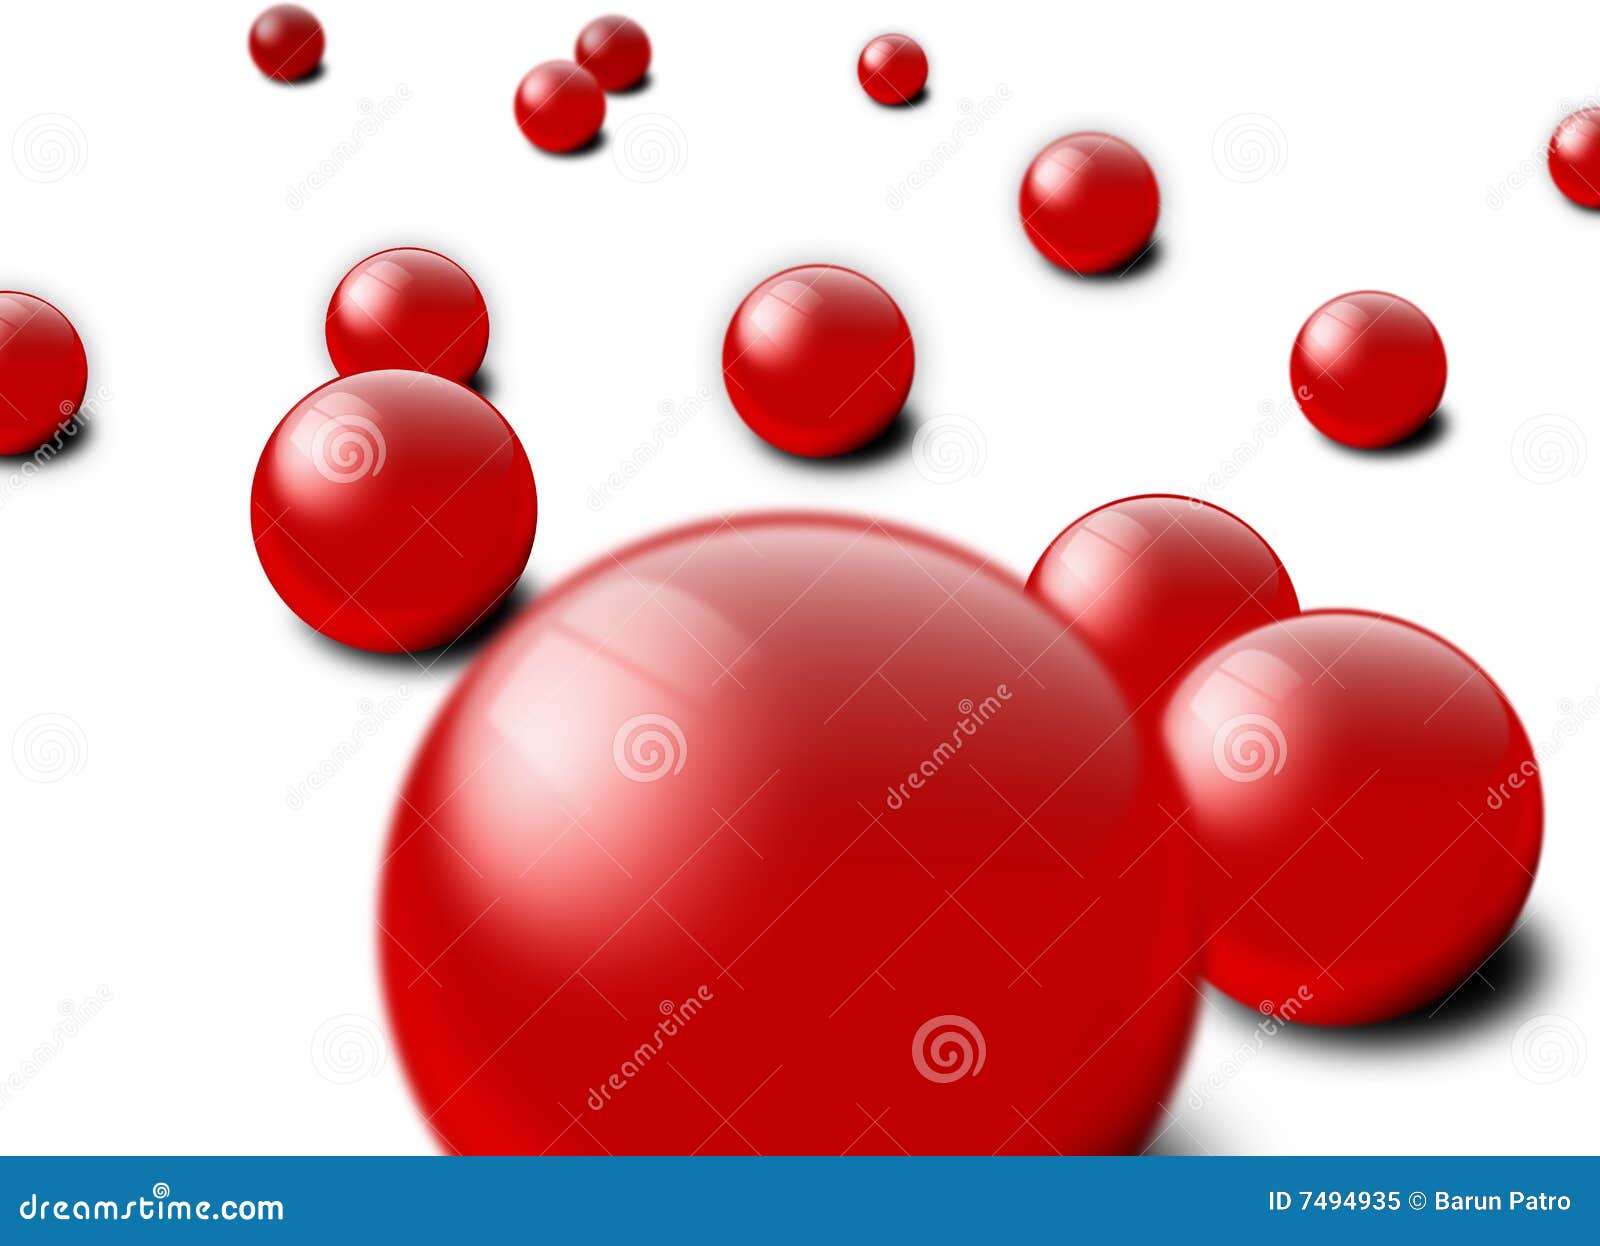 Scattered Marbles Stock Illustrations – 76 Scattered Marbles Stock  Illustrations, Vectors & Clipart - Dreamstime